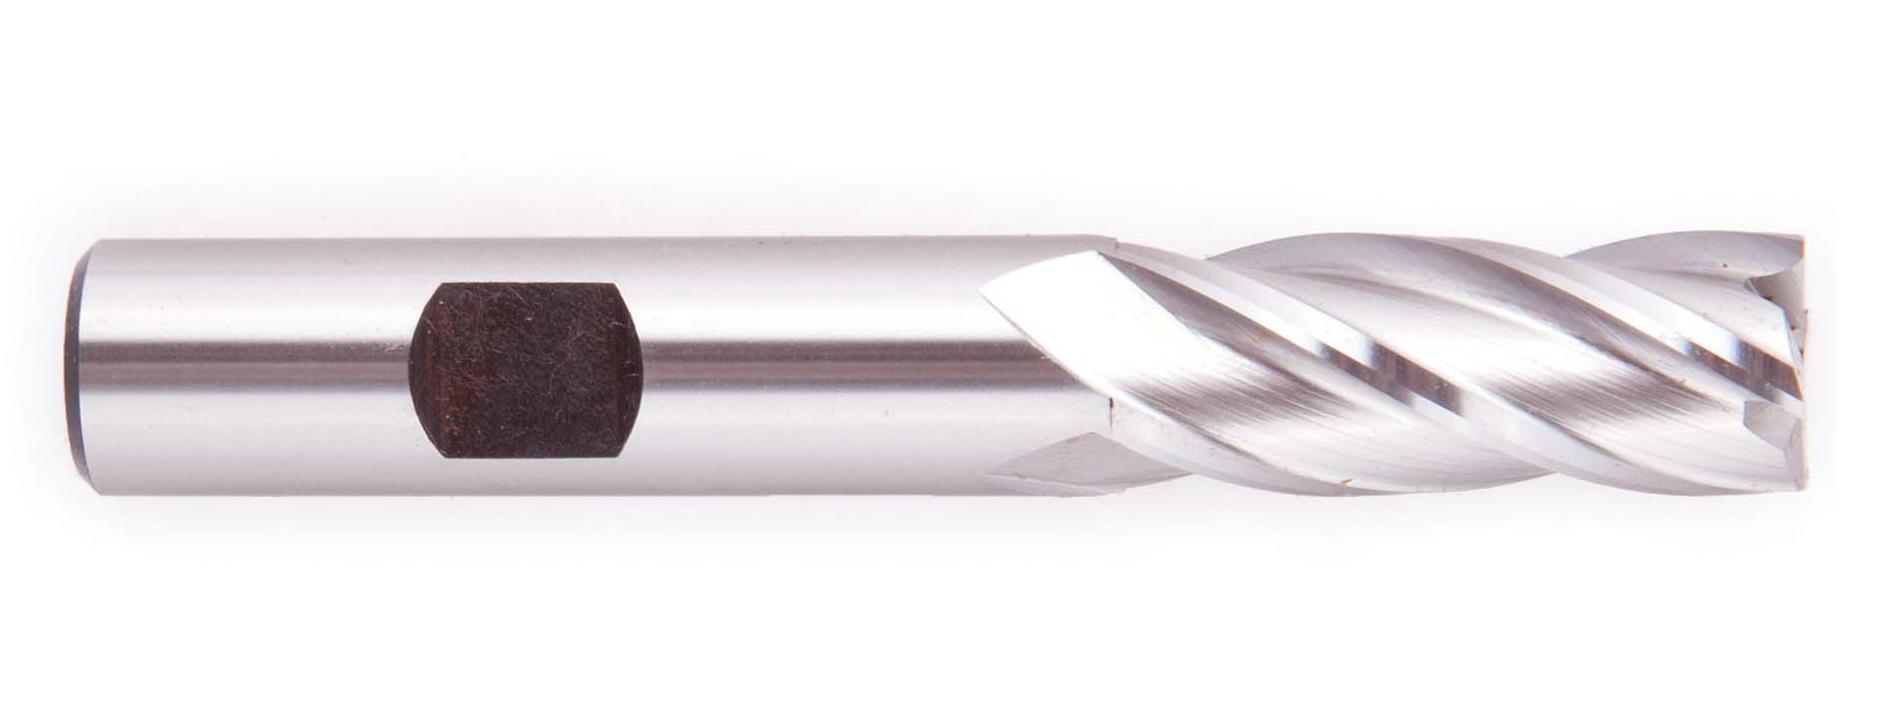 End Mill With TiNn Coated, Single End, 2 Inch Dia., 6-1/2 Inch Length, 6 Flutes